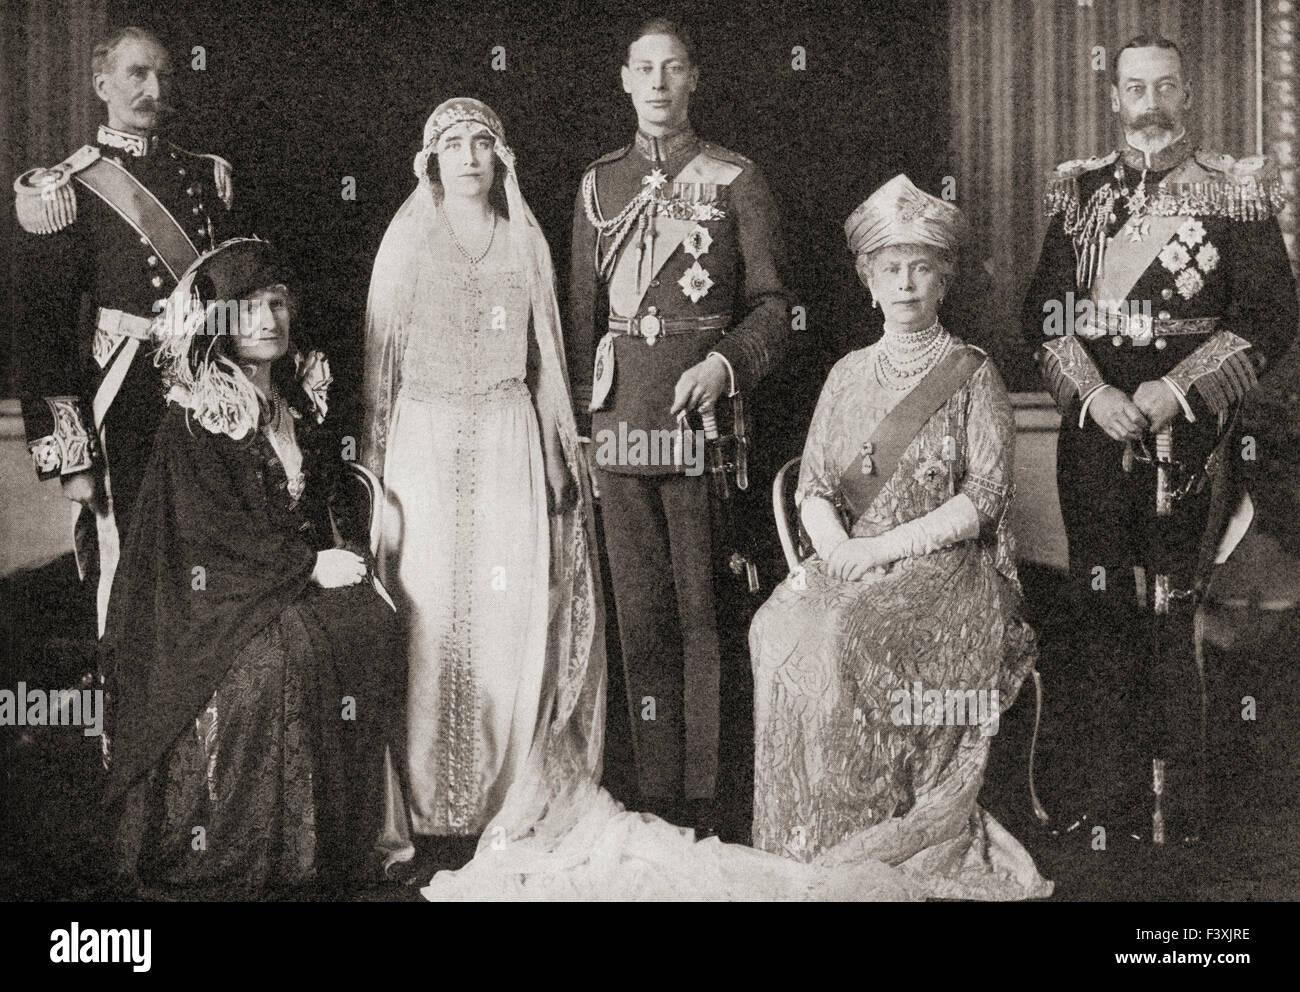 The British Royal Family at the wedding of The Duke and Duchess of York, 1923. From left to right, Claude George Bowes-Lyon, 14th Earl of Strathmore and Kinghorne, the bride's father.  Cecilia Nina Bowes-Lyon, Countess of Strathmore and Kinghorne, née Cavendish-Bentinck, the bride's mother.  Elizabeth Angela Marguerite Bowes-Lyon.   The Duke of York, later King George VI.  Mary of Teck, the groom's mother.  King George V, the groom's father. Stock Photo